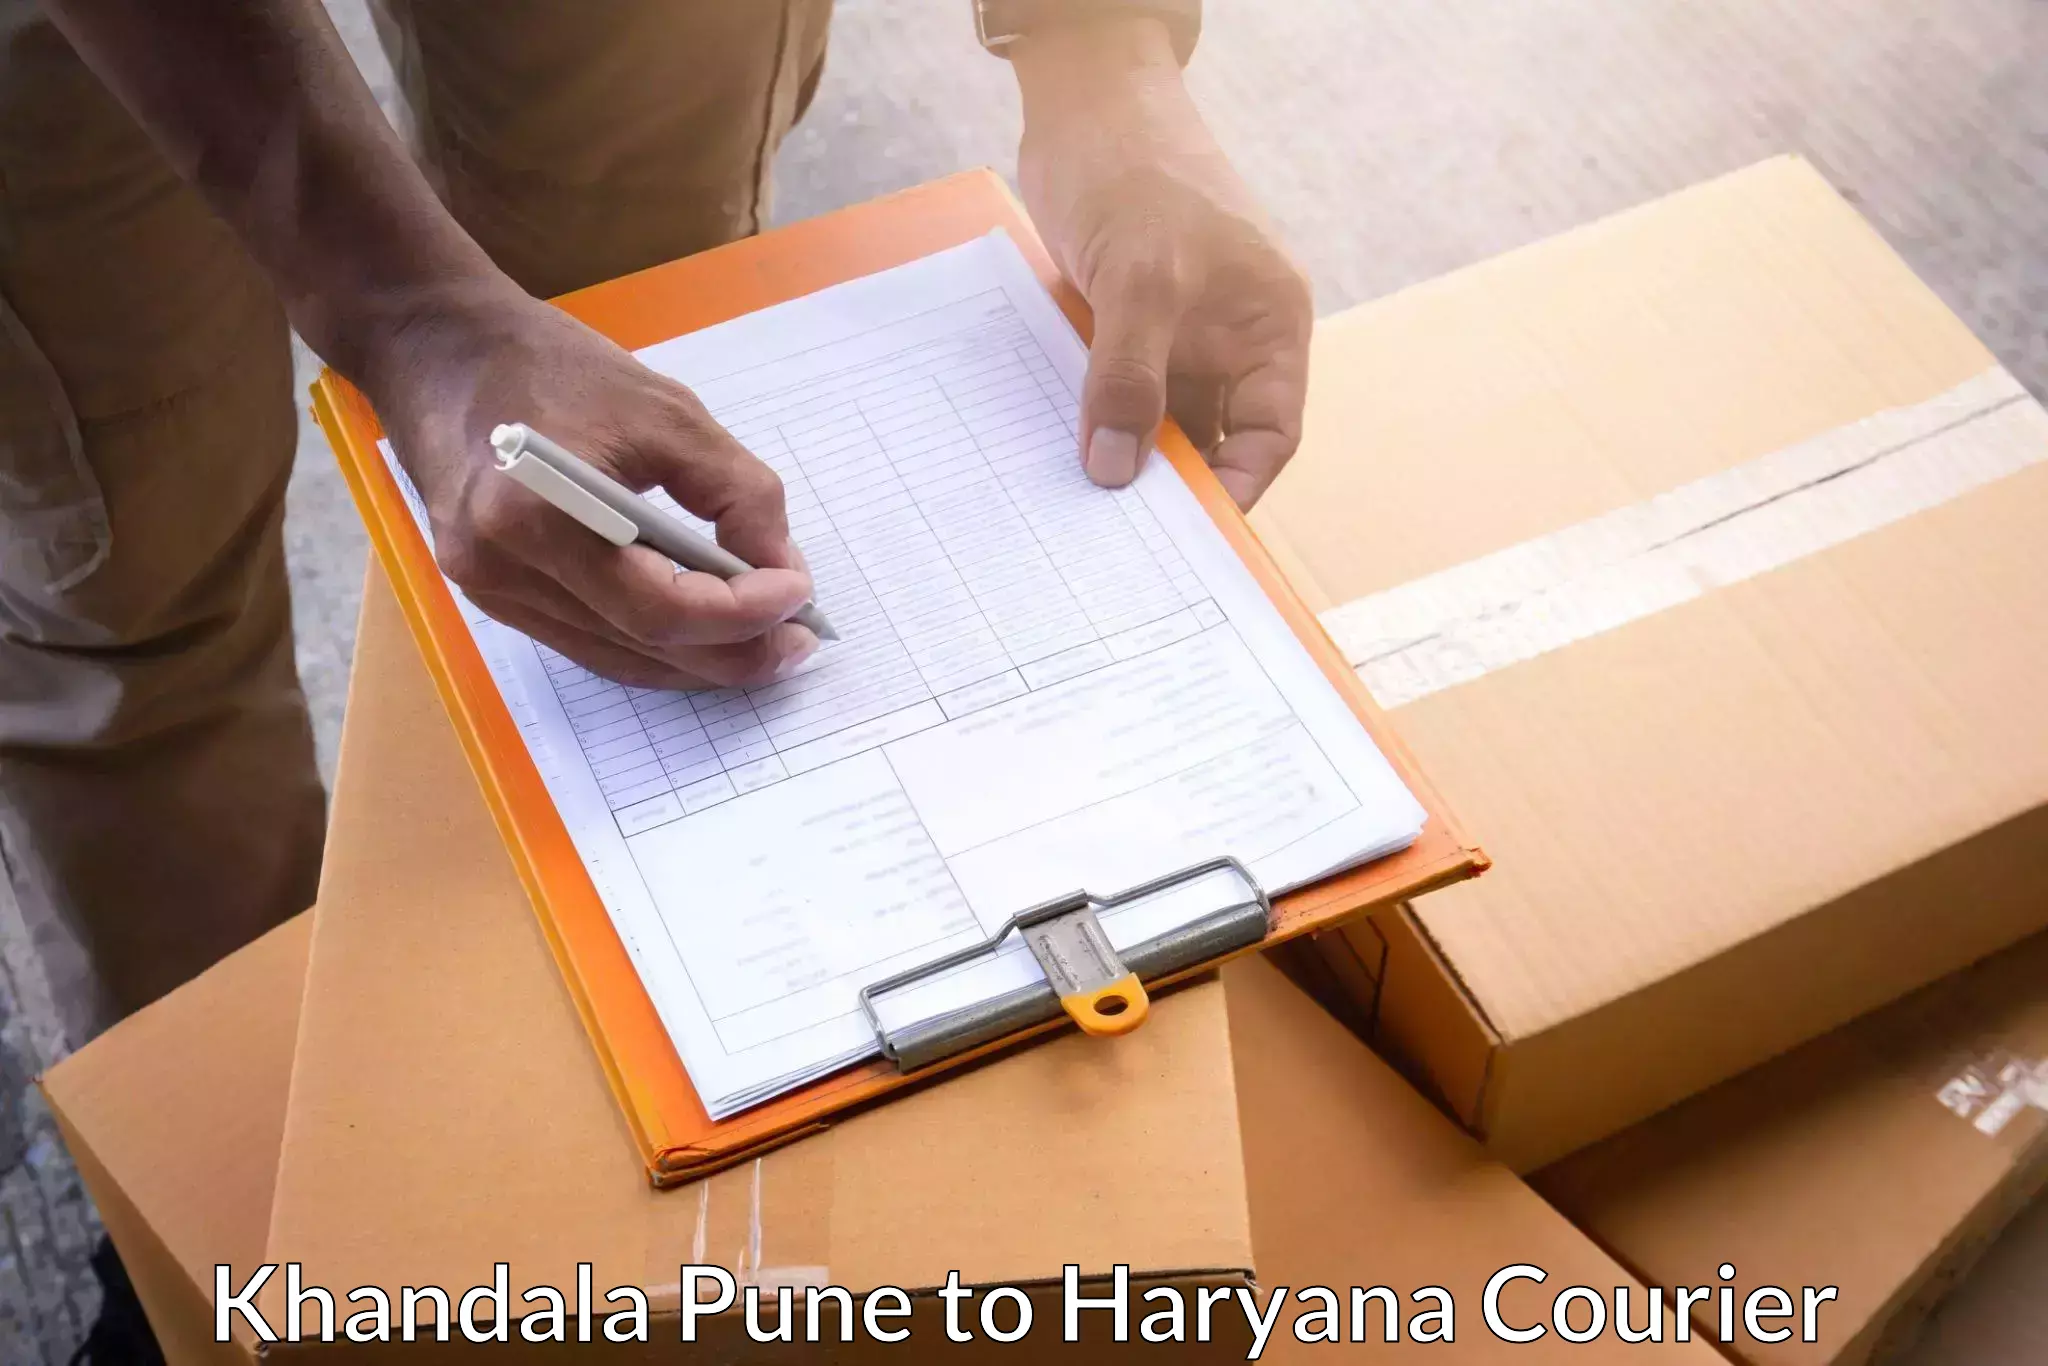 Courier rate comparison Khandala Pune to Nuh